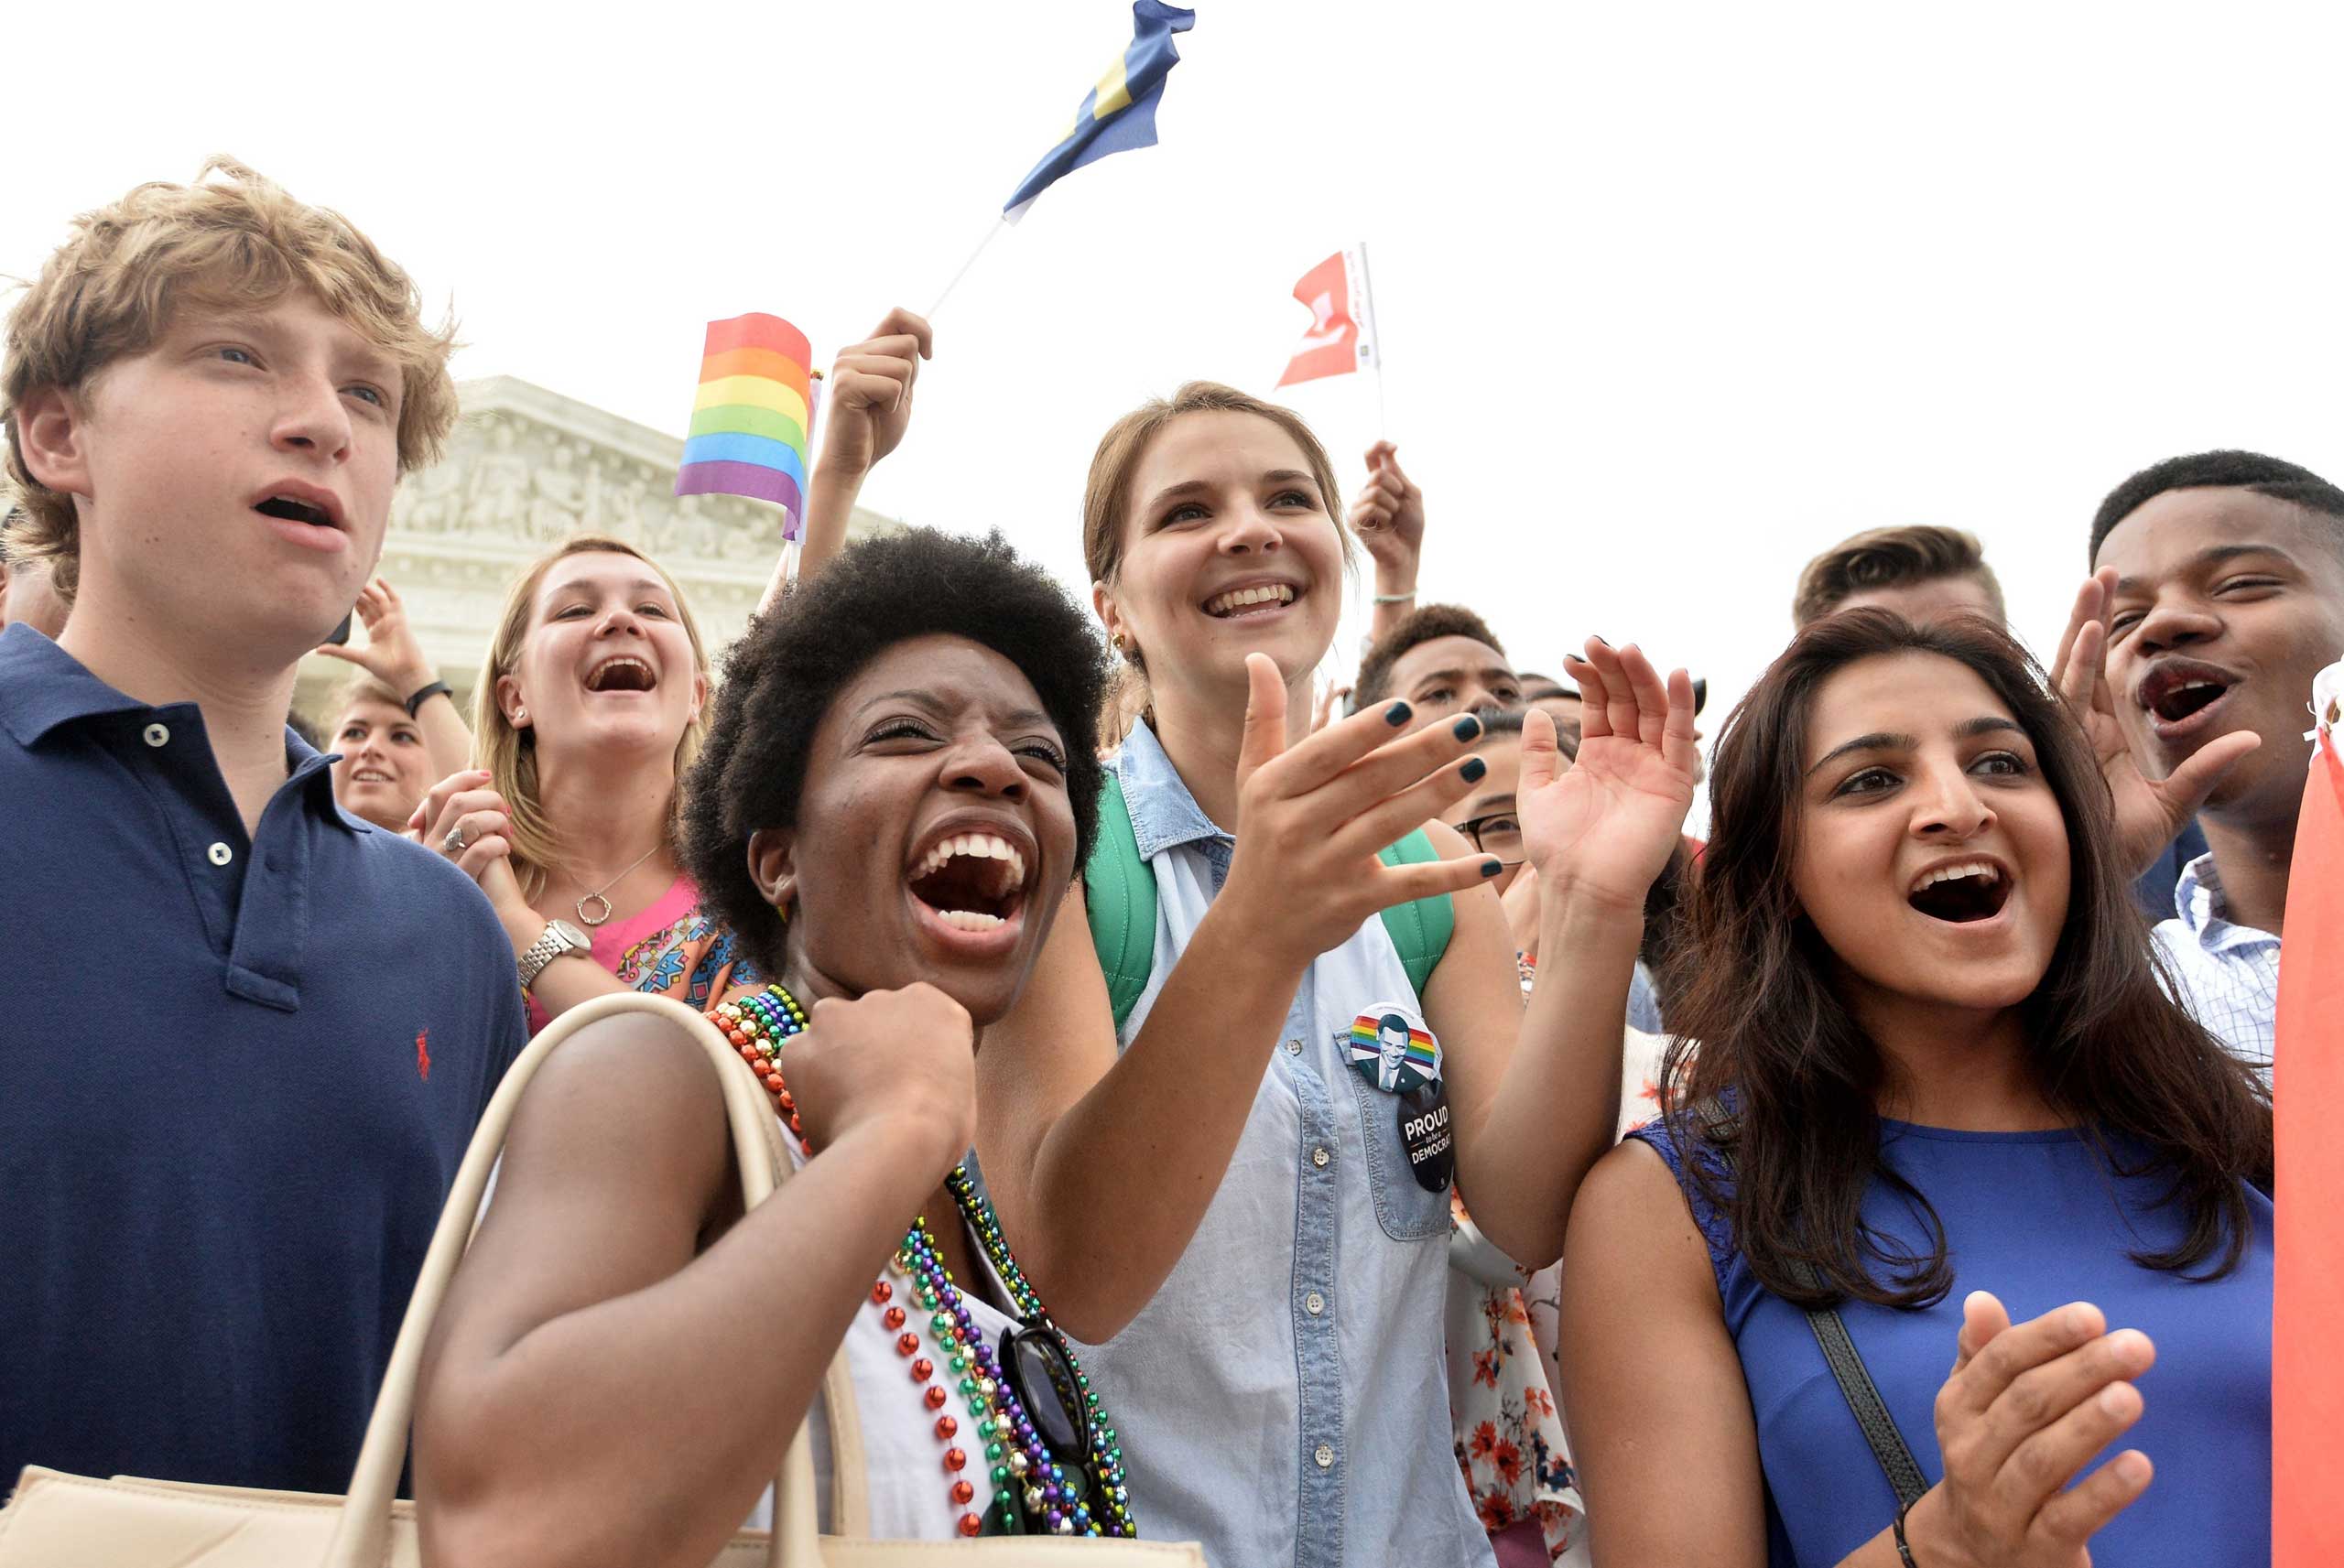 Supporters of same-sex marriage celebrate outside of the Supreme Court in Washington, on June 26, 2015.